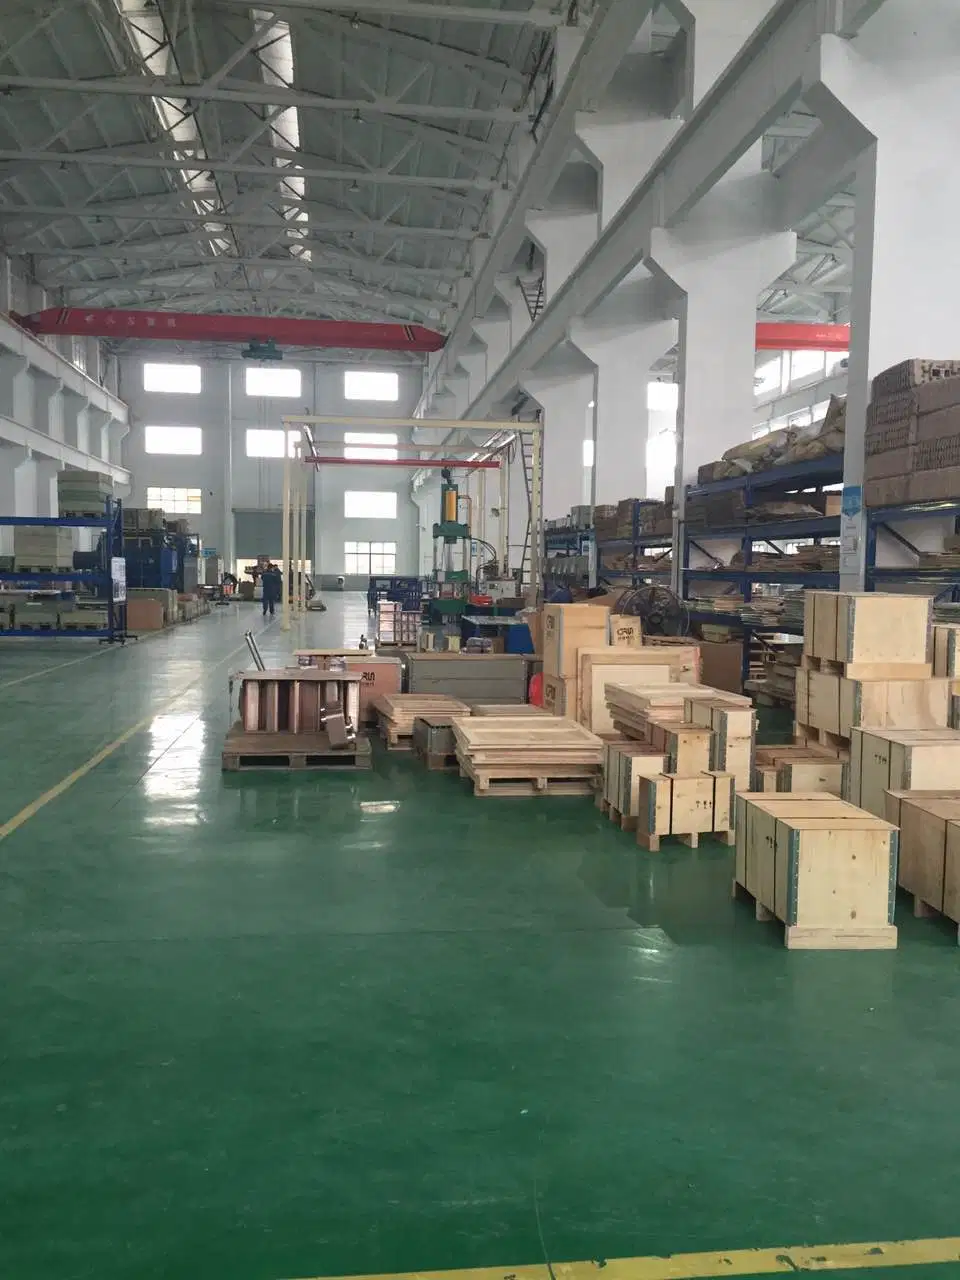 Customized Gasketed Plate and Frame Heat Exchanger, All Famous Brands Replacement Spare Parts, Plates, Gasket, Heat Exchanger